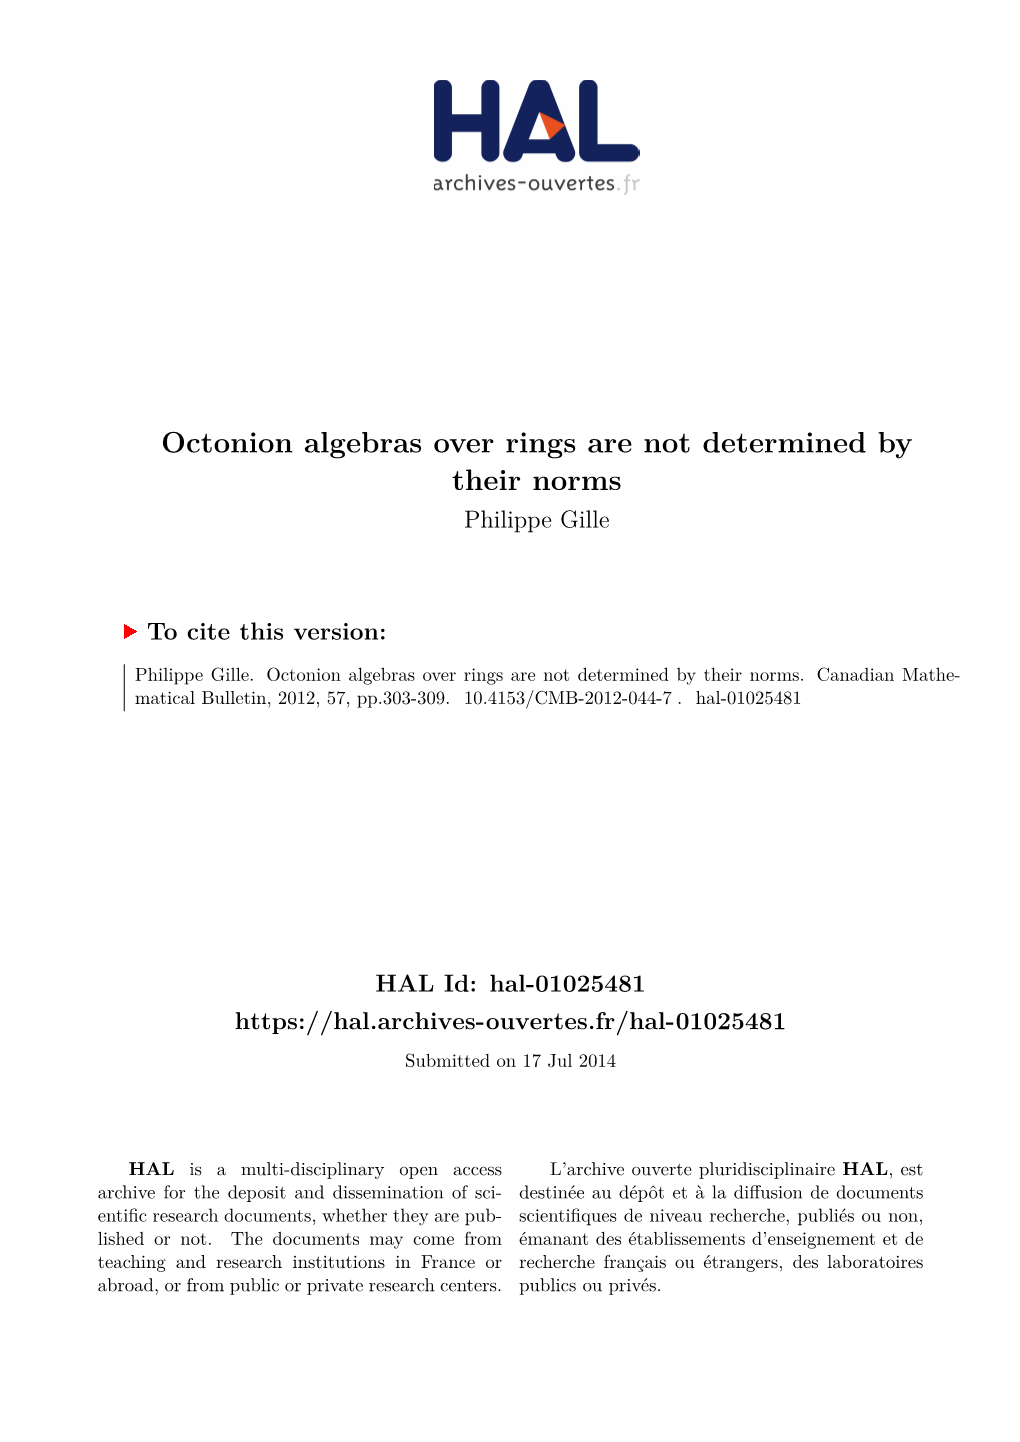 Octonion Algebras Over Rings Are Not Determined by Their Norms Philippe Gille